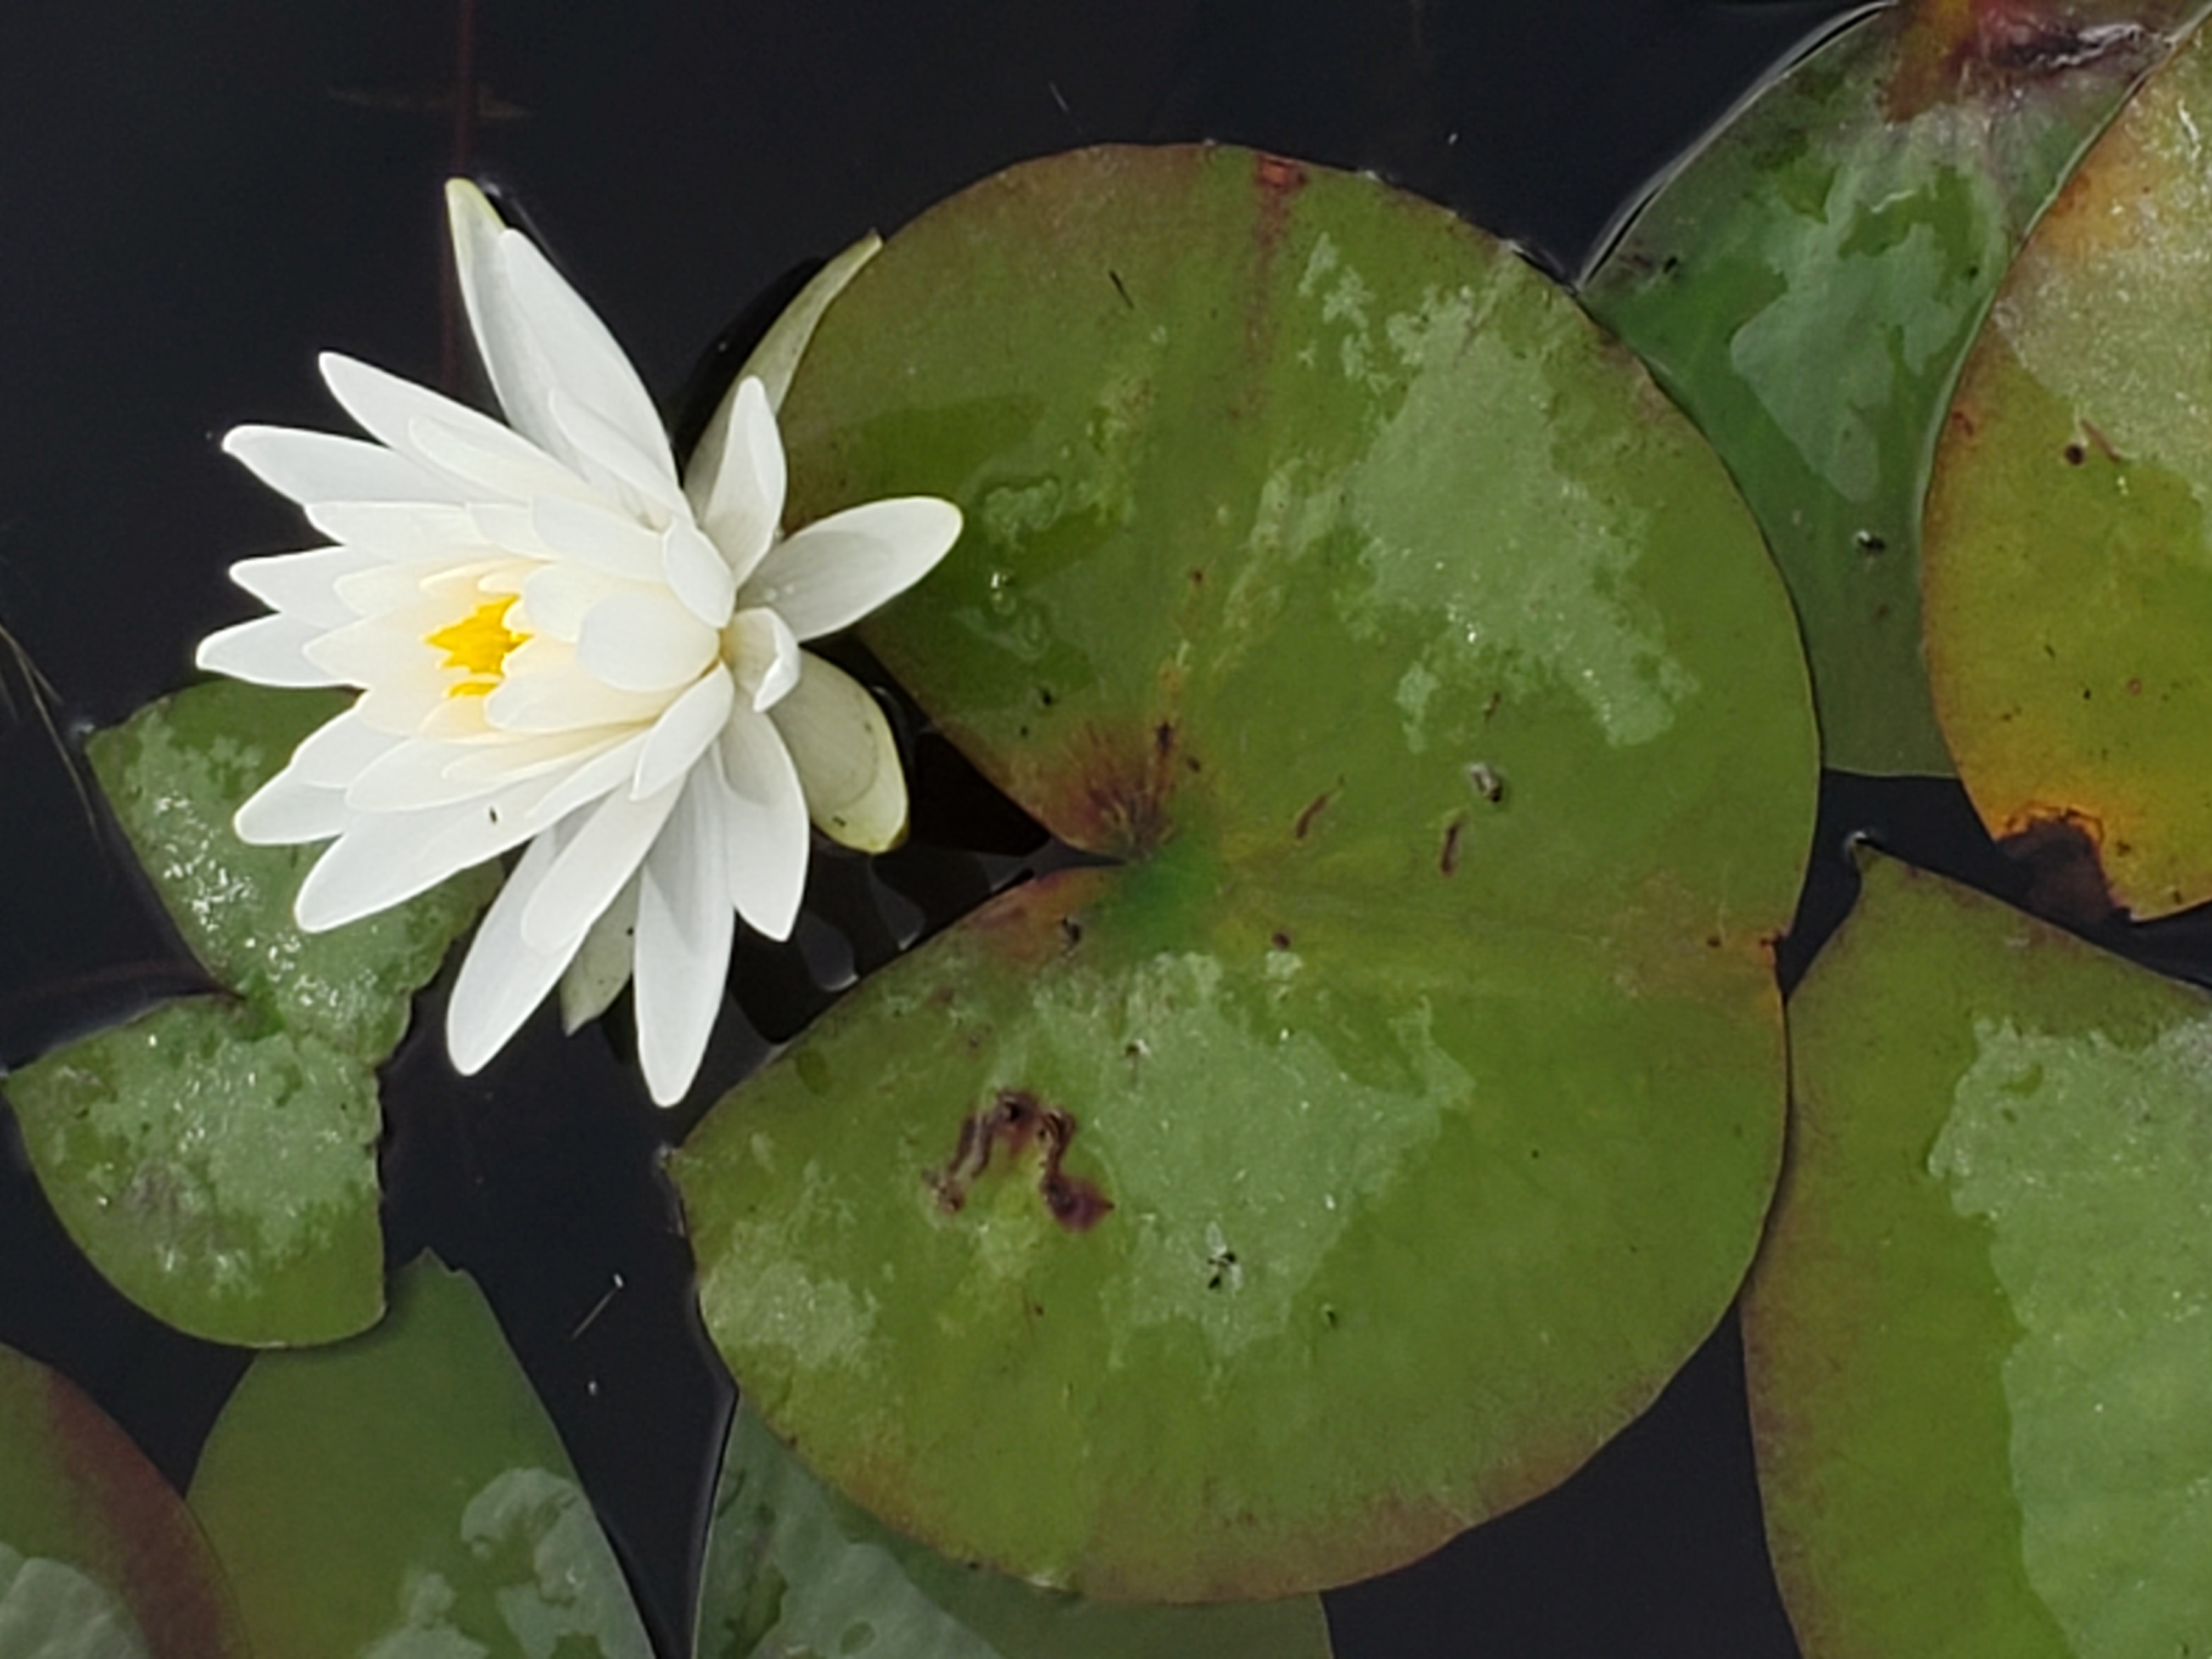 A white flower with many petals and yellow center floating next to round shiny leaves.